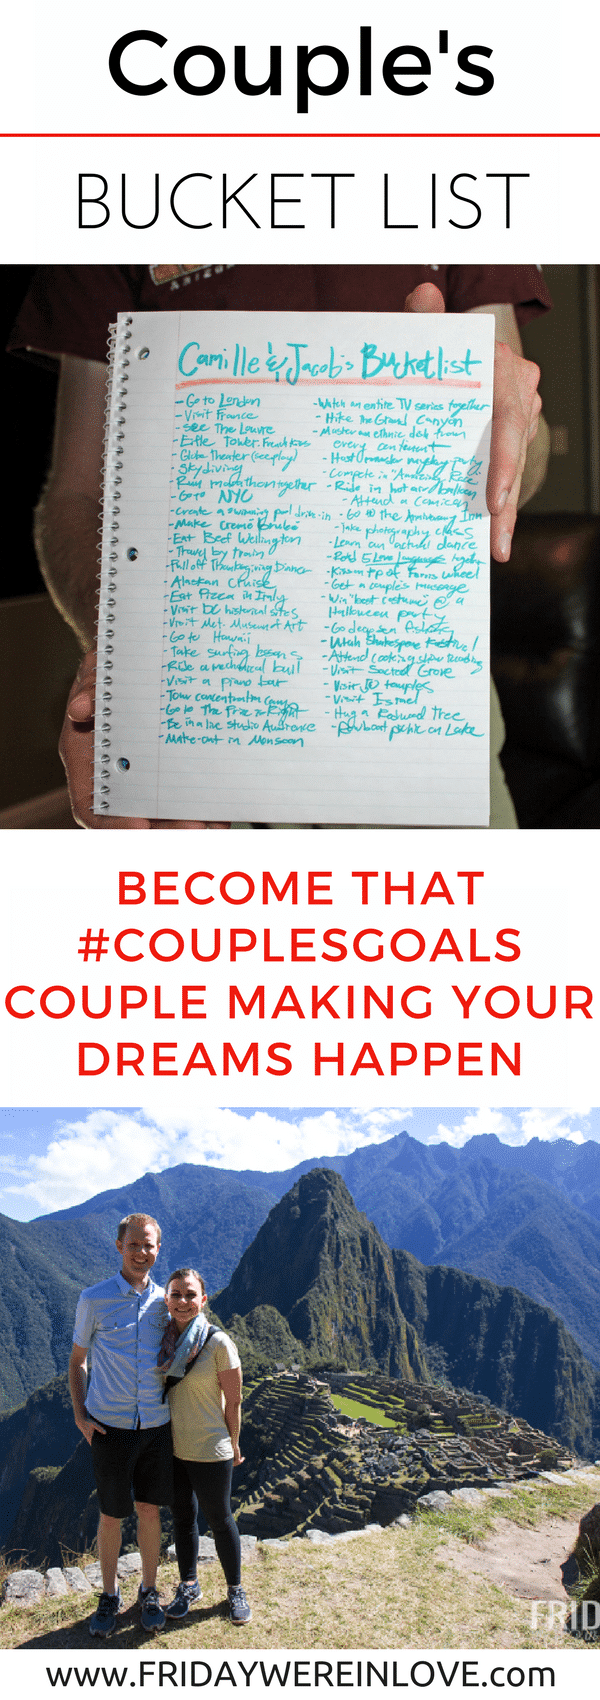 Creating a Couple's Bucket List: Become that couples goals couple by planning your dreams and ways to make them happen | couple goals | couple goals bucket lists |couple goals relationships | couples goals